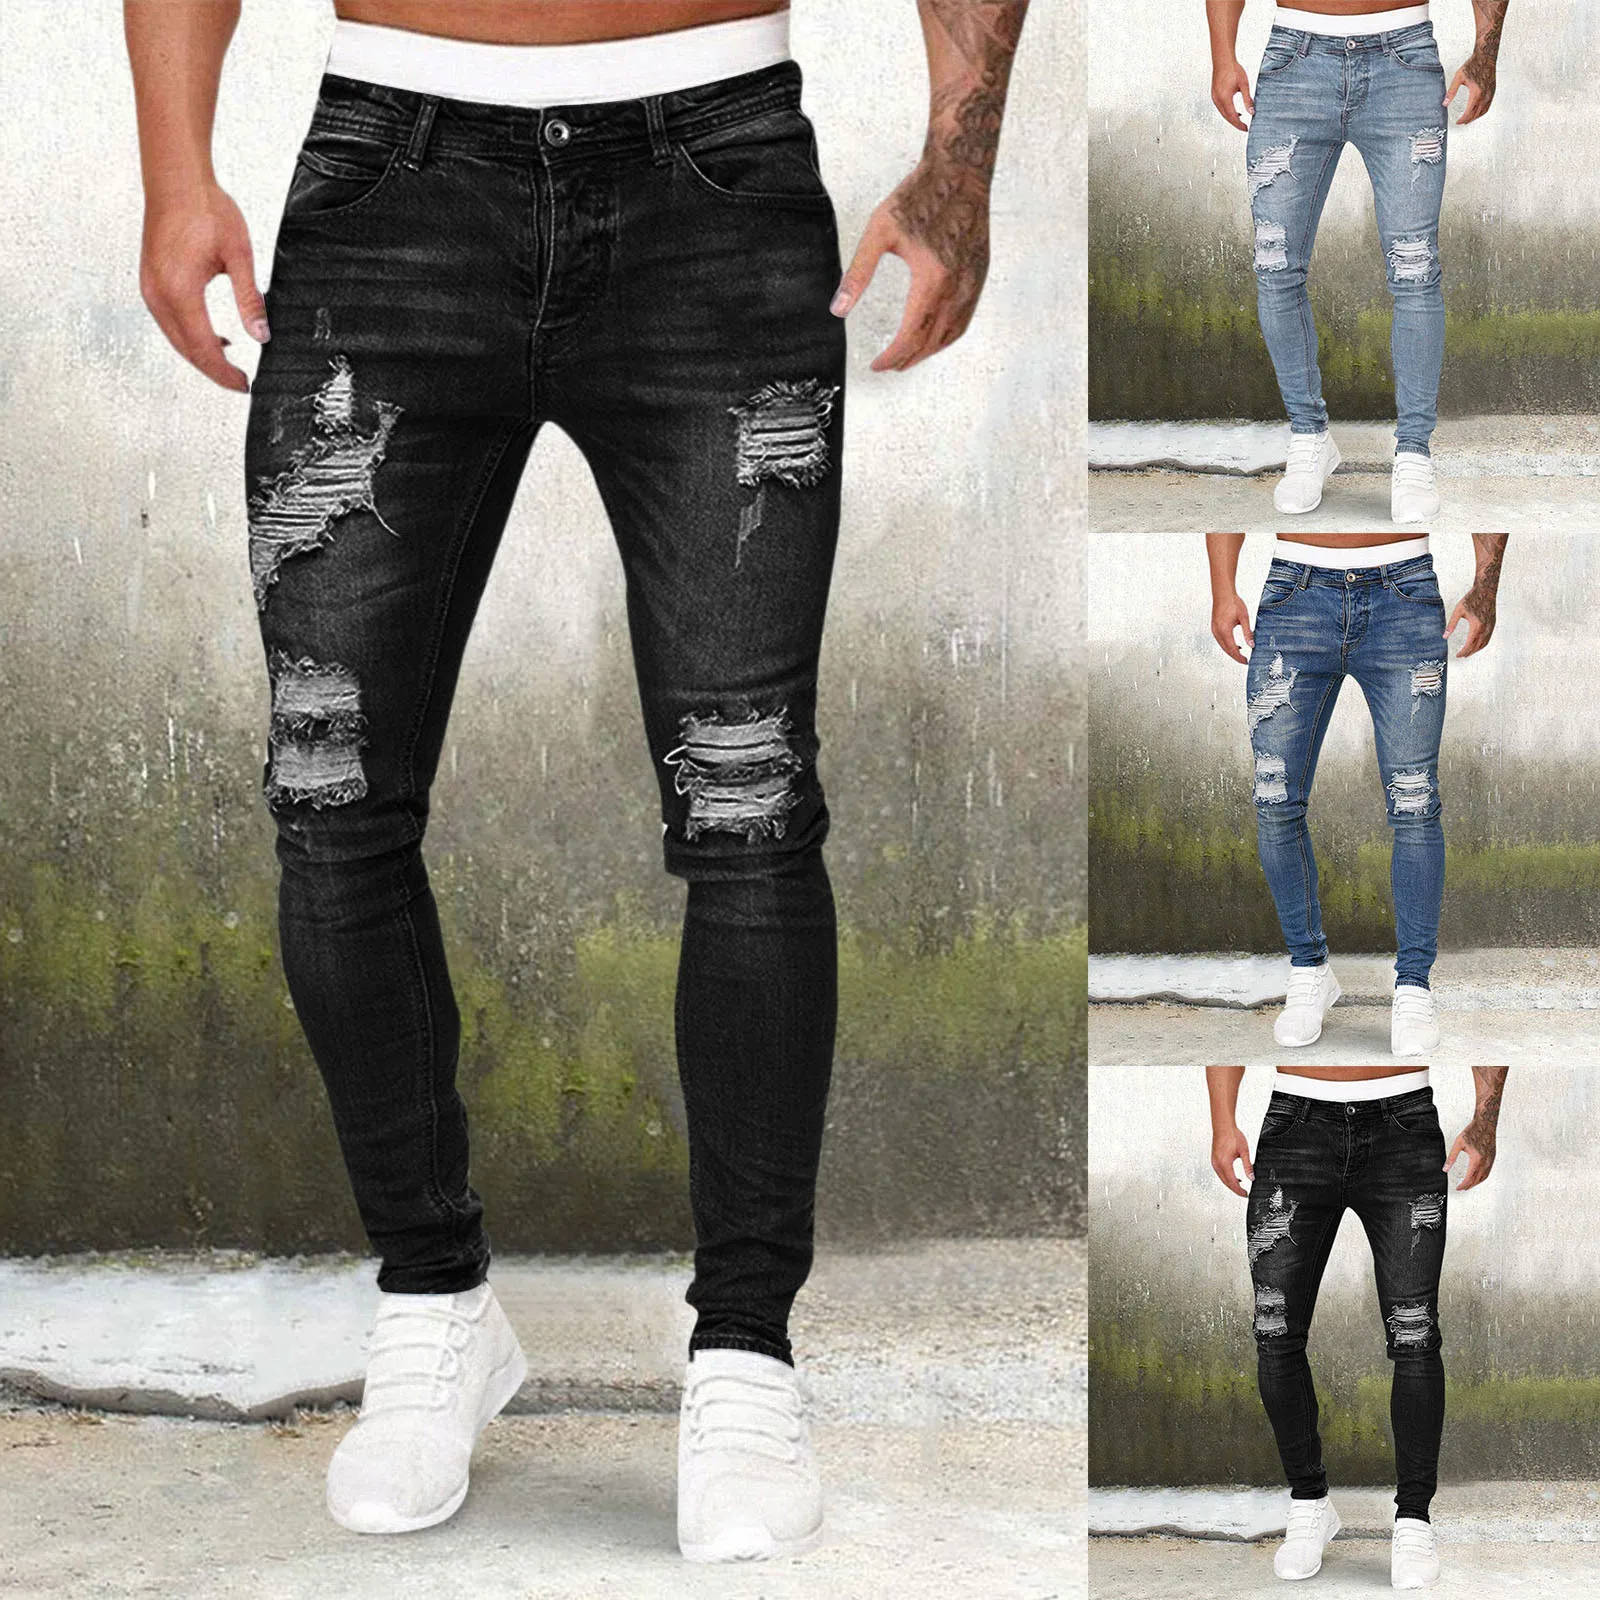 Europe America Mens Ripped Skinny Jeans Blue Slim Hole Pencil Pants Biker Casual Trousers Streetwear High Quality Denim Clothing men s black stretchy jeans skinny slim fit hot drill letter punk streetwear biker trousers man high quality denim pencil pants